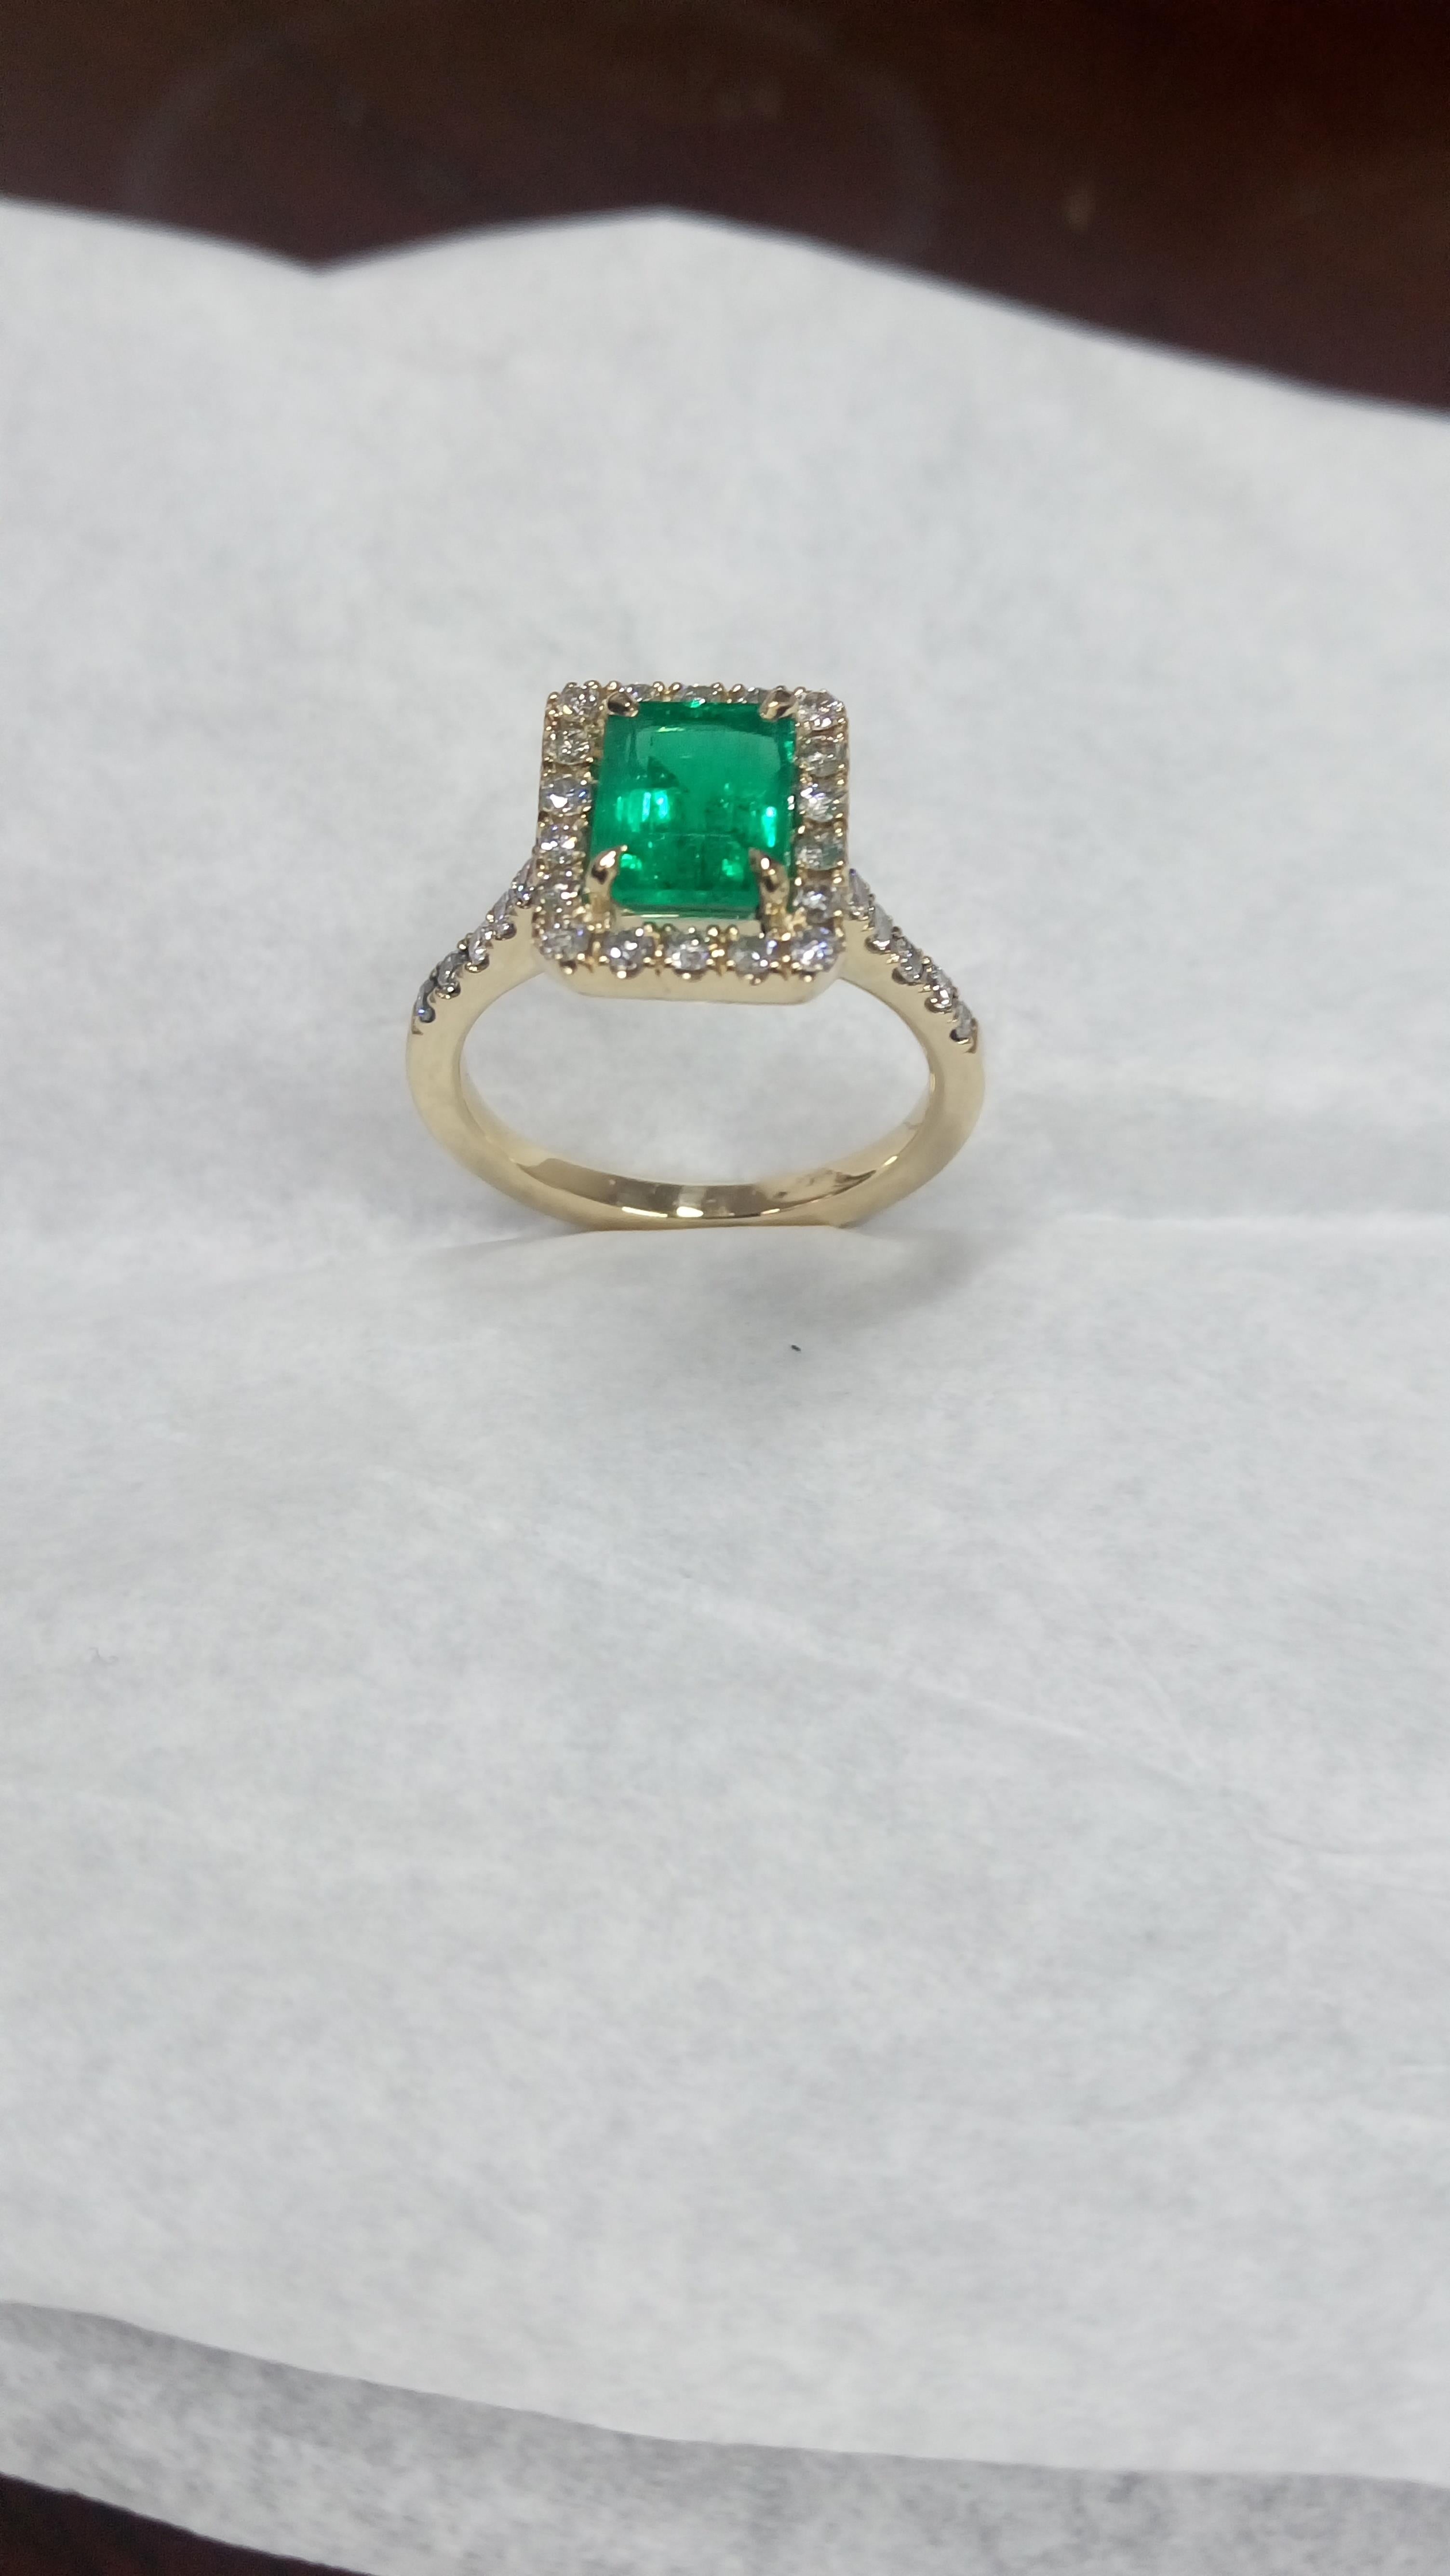 Colombian emerald and diamond engagement ring set in 18K yellow gold and surrounded by a diamond halo comprising 0.56 carats of diamonds.